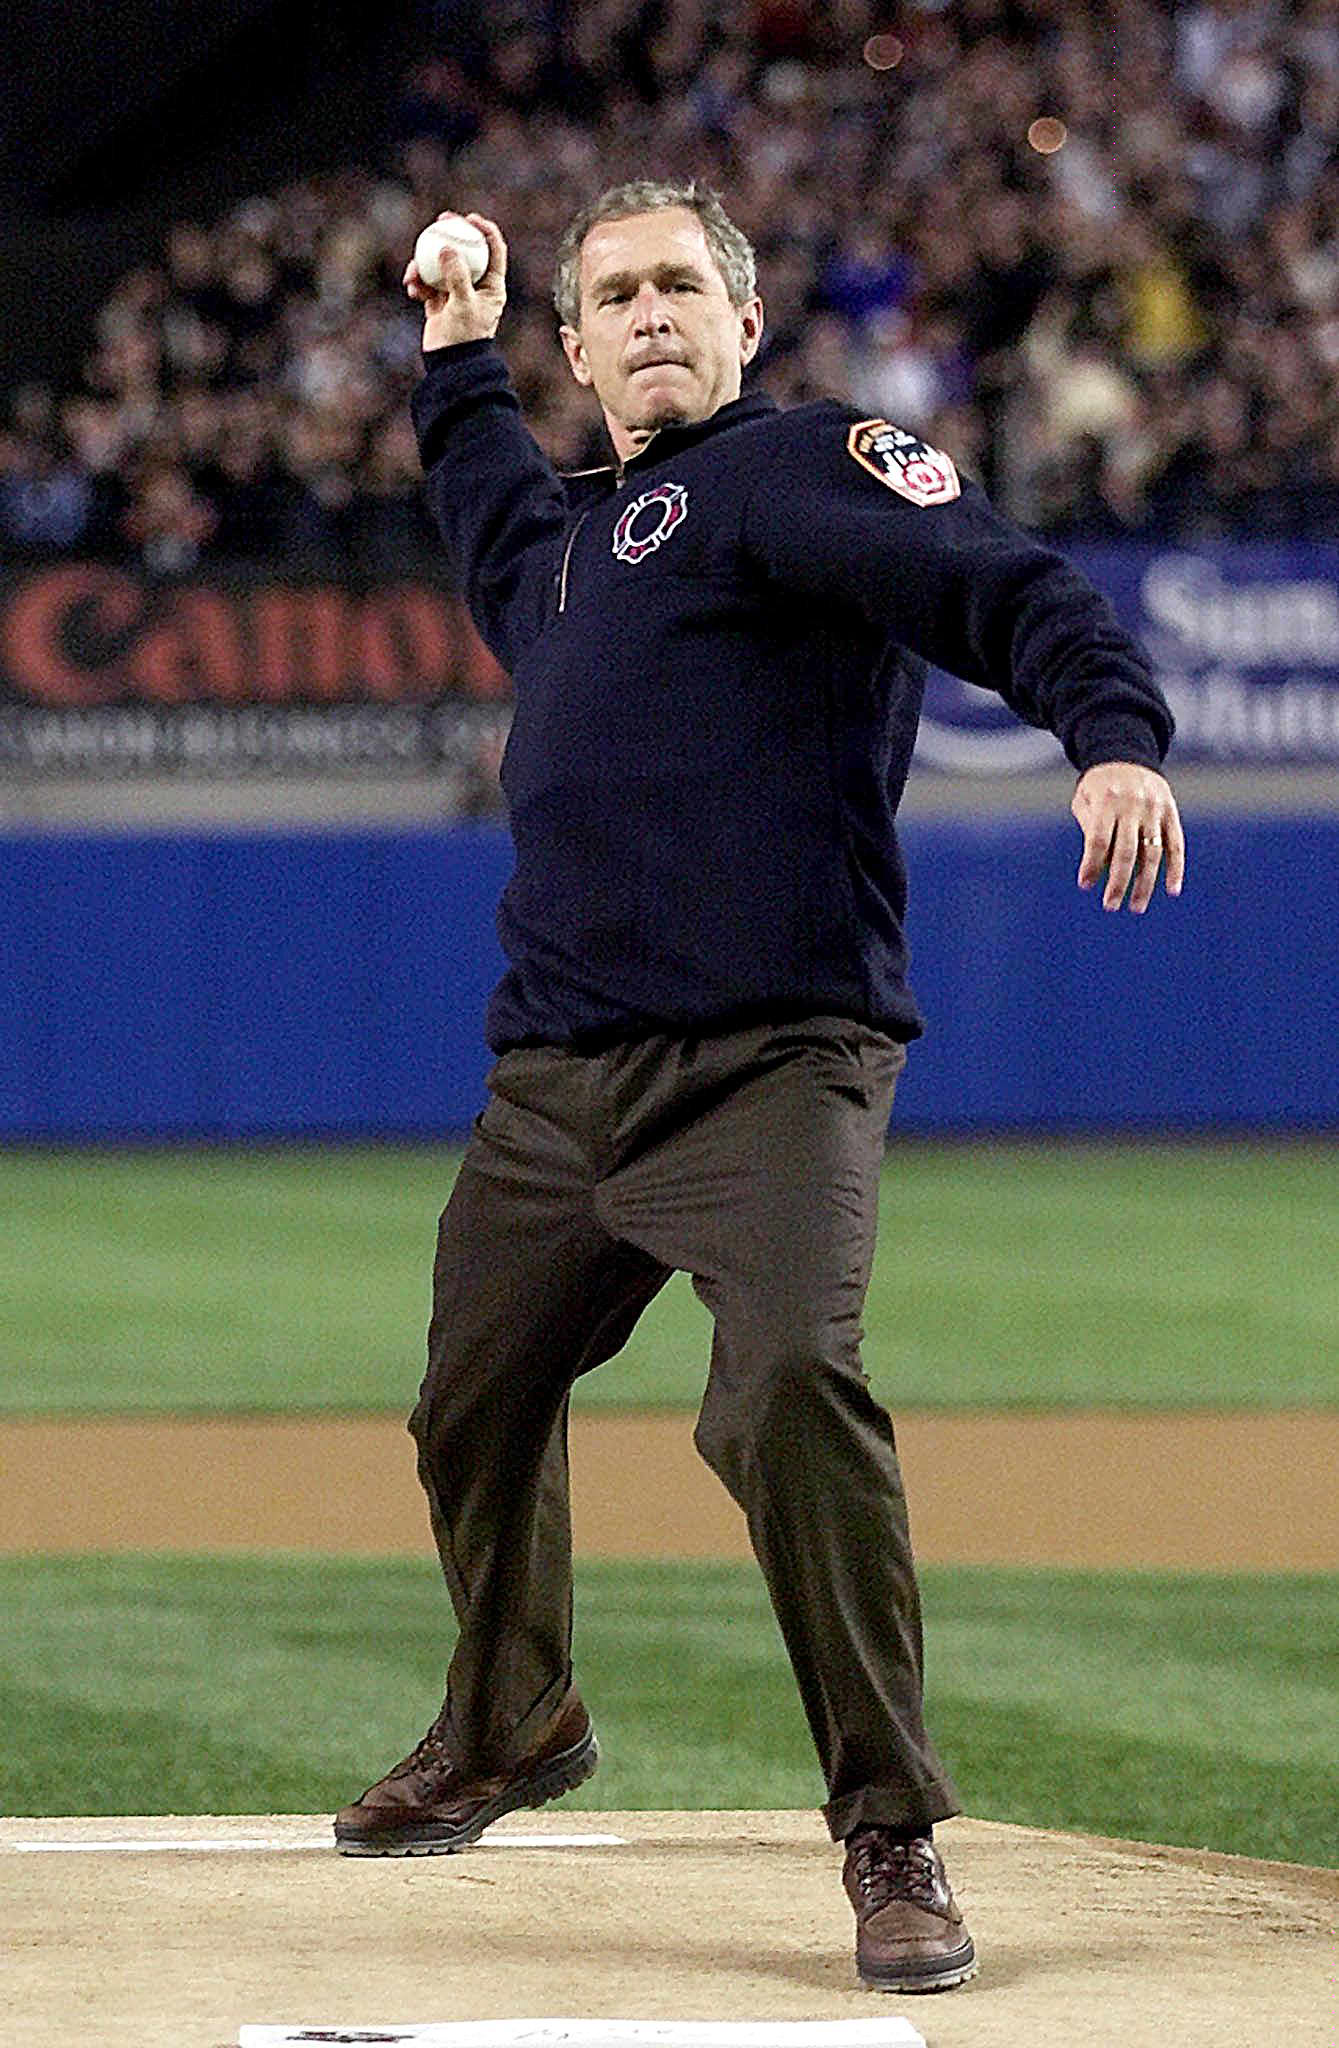 Ralph Lauren throws out the first pitch at Yankee Stadium 